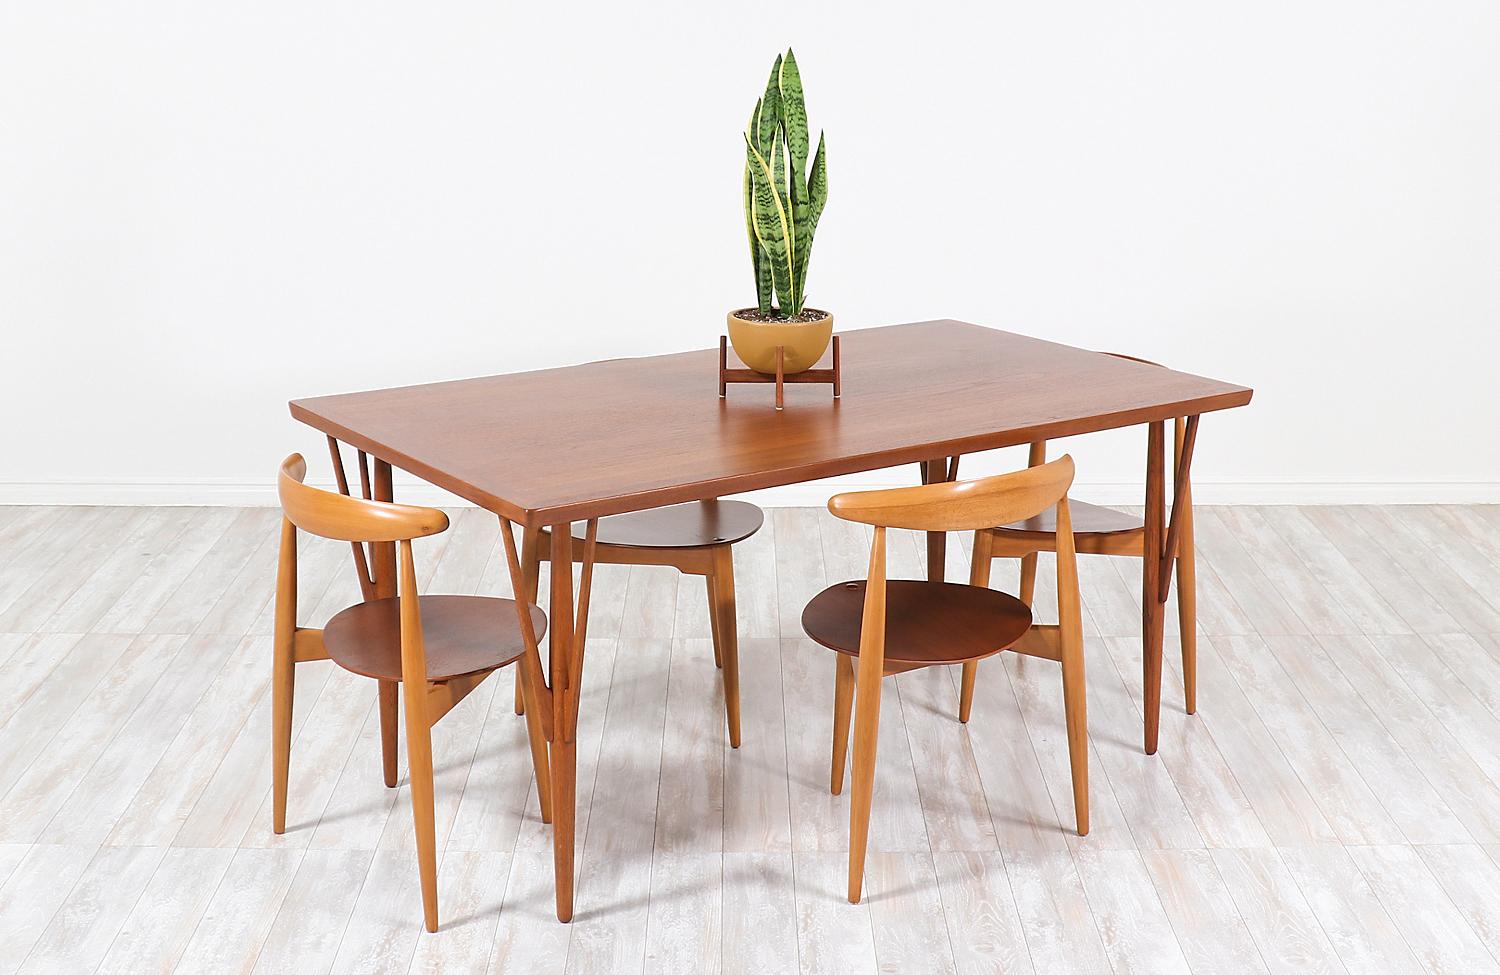 Stylish dining table/desk designed by Hans J. Wegner for Johannes Hansen in Denmark, circa 1950s. This Classic model JH-561 table features a solid teak wood rectangular top and angled legs with stretchers adding a Minimalist and clean modern look.